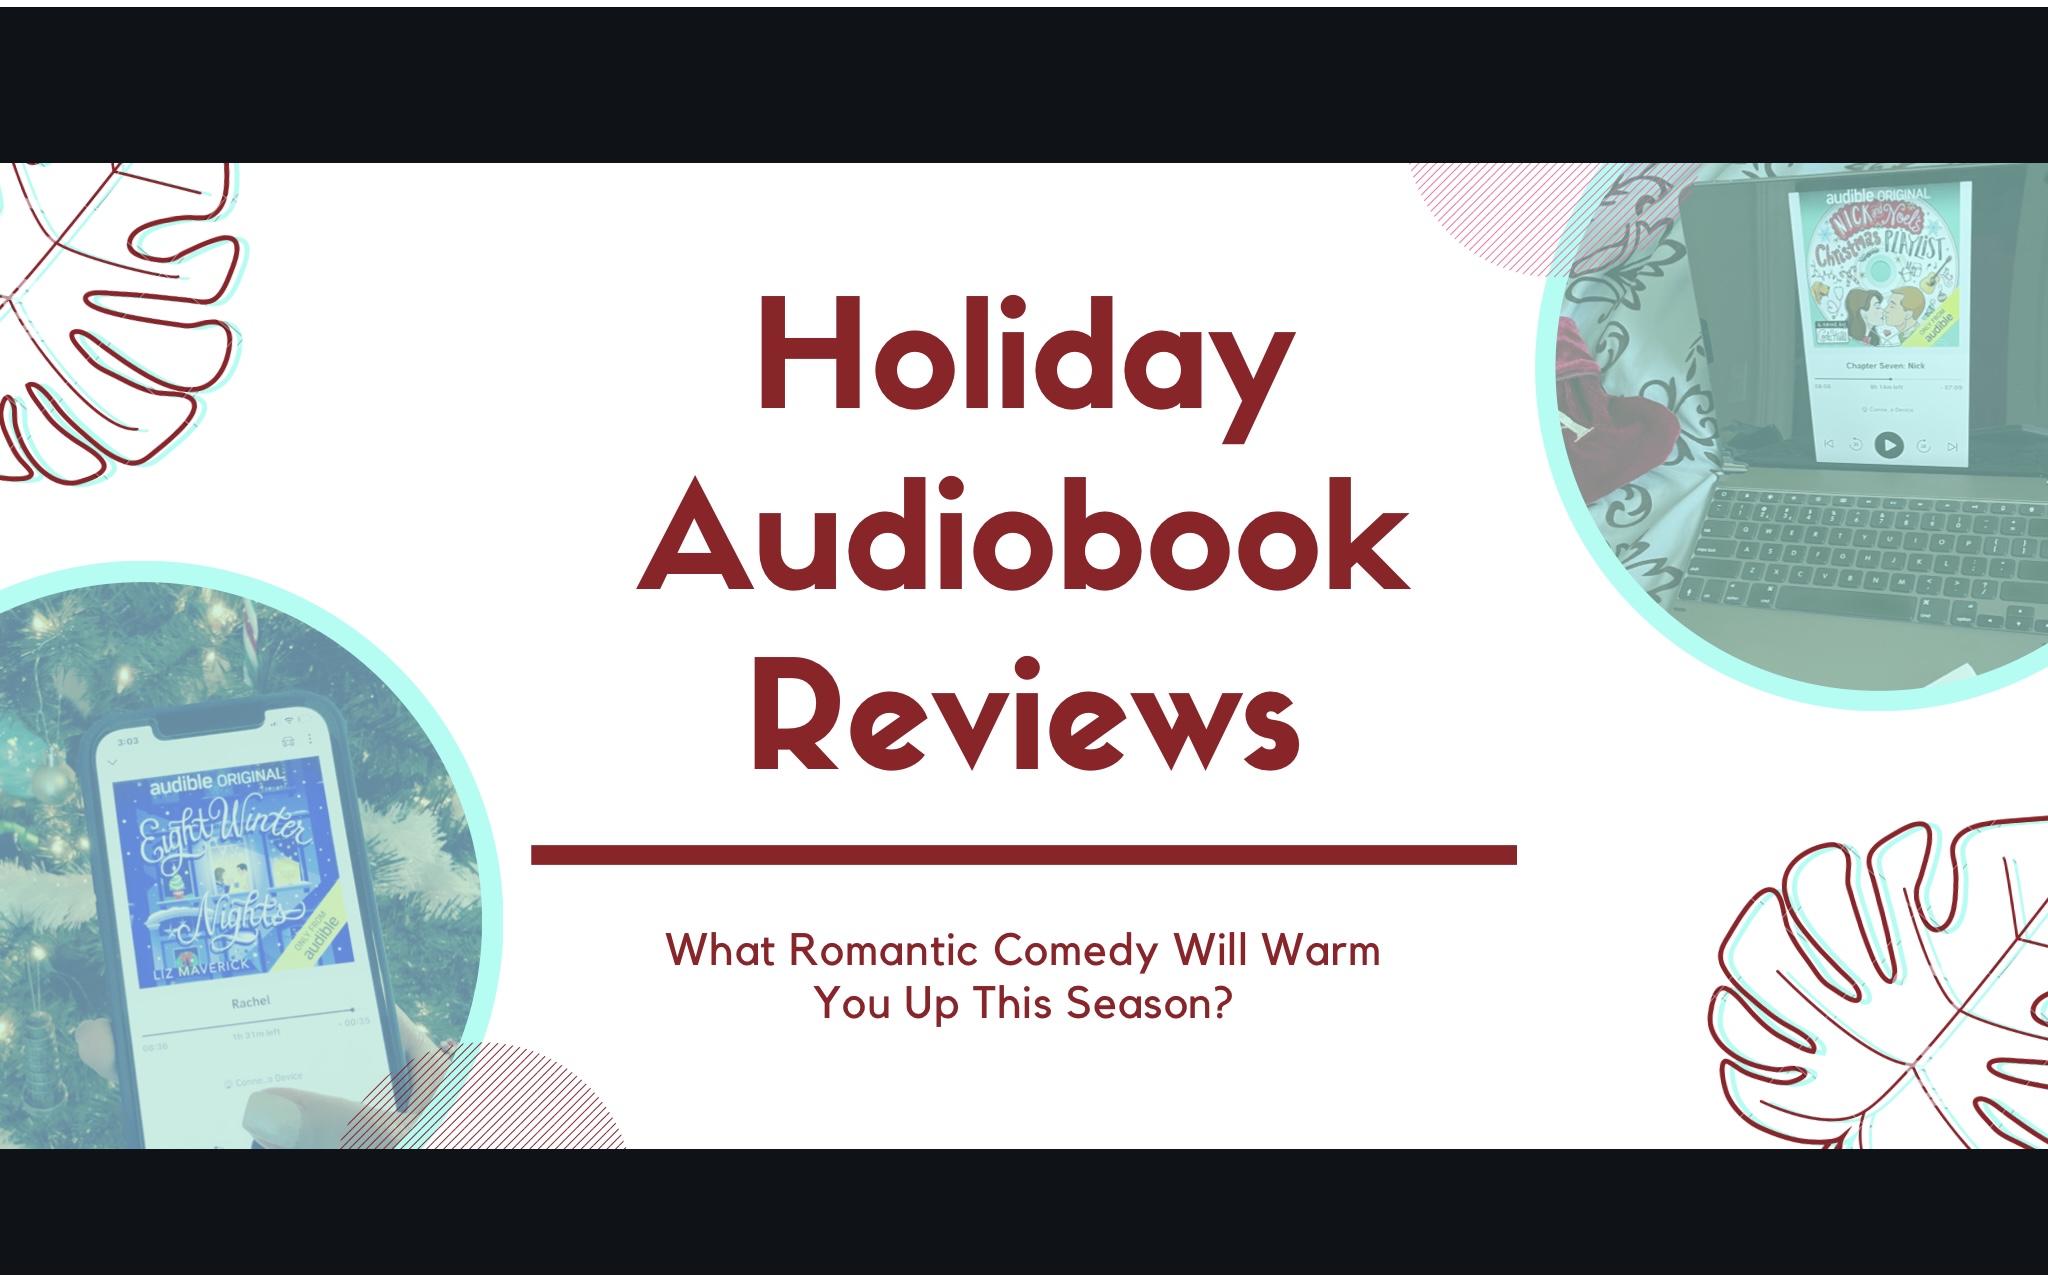 Holiday audiobook reviews for 2020